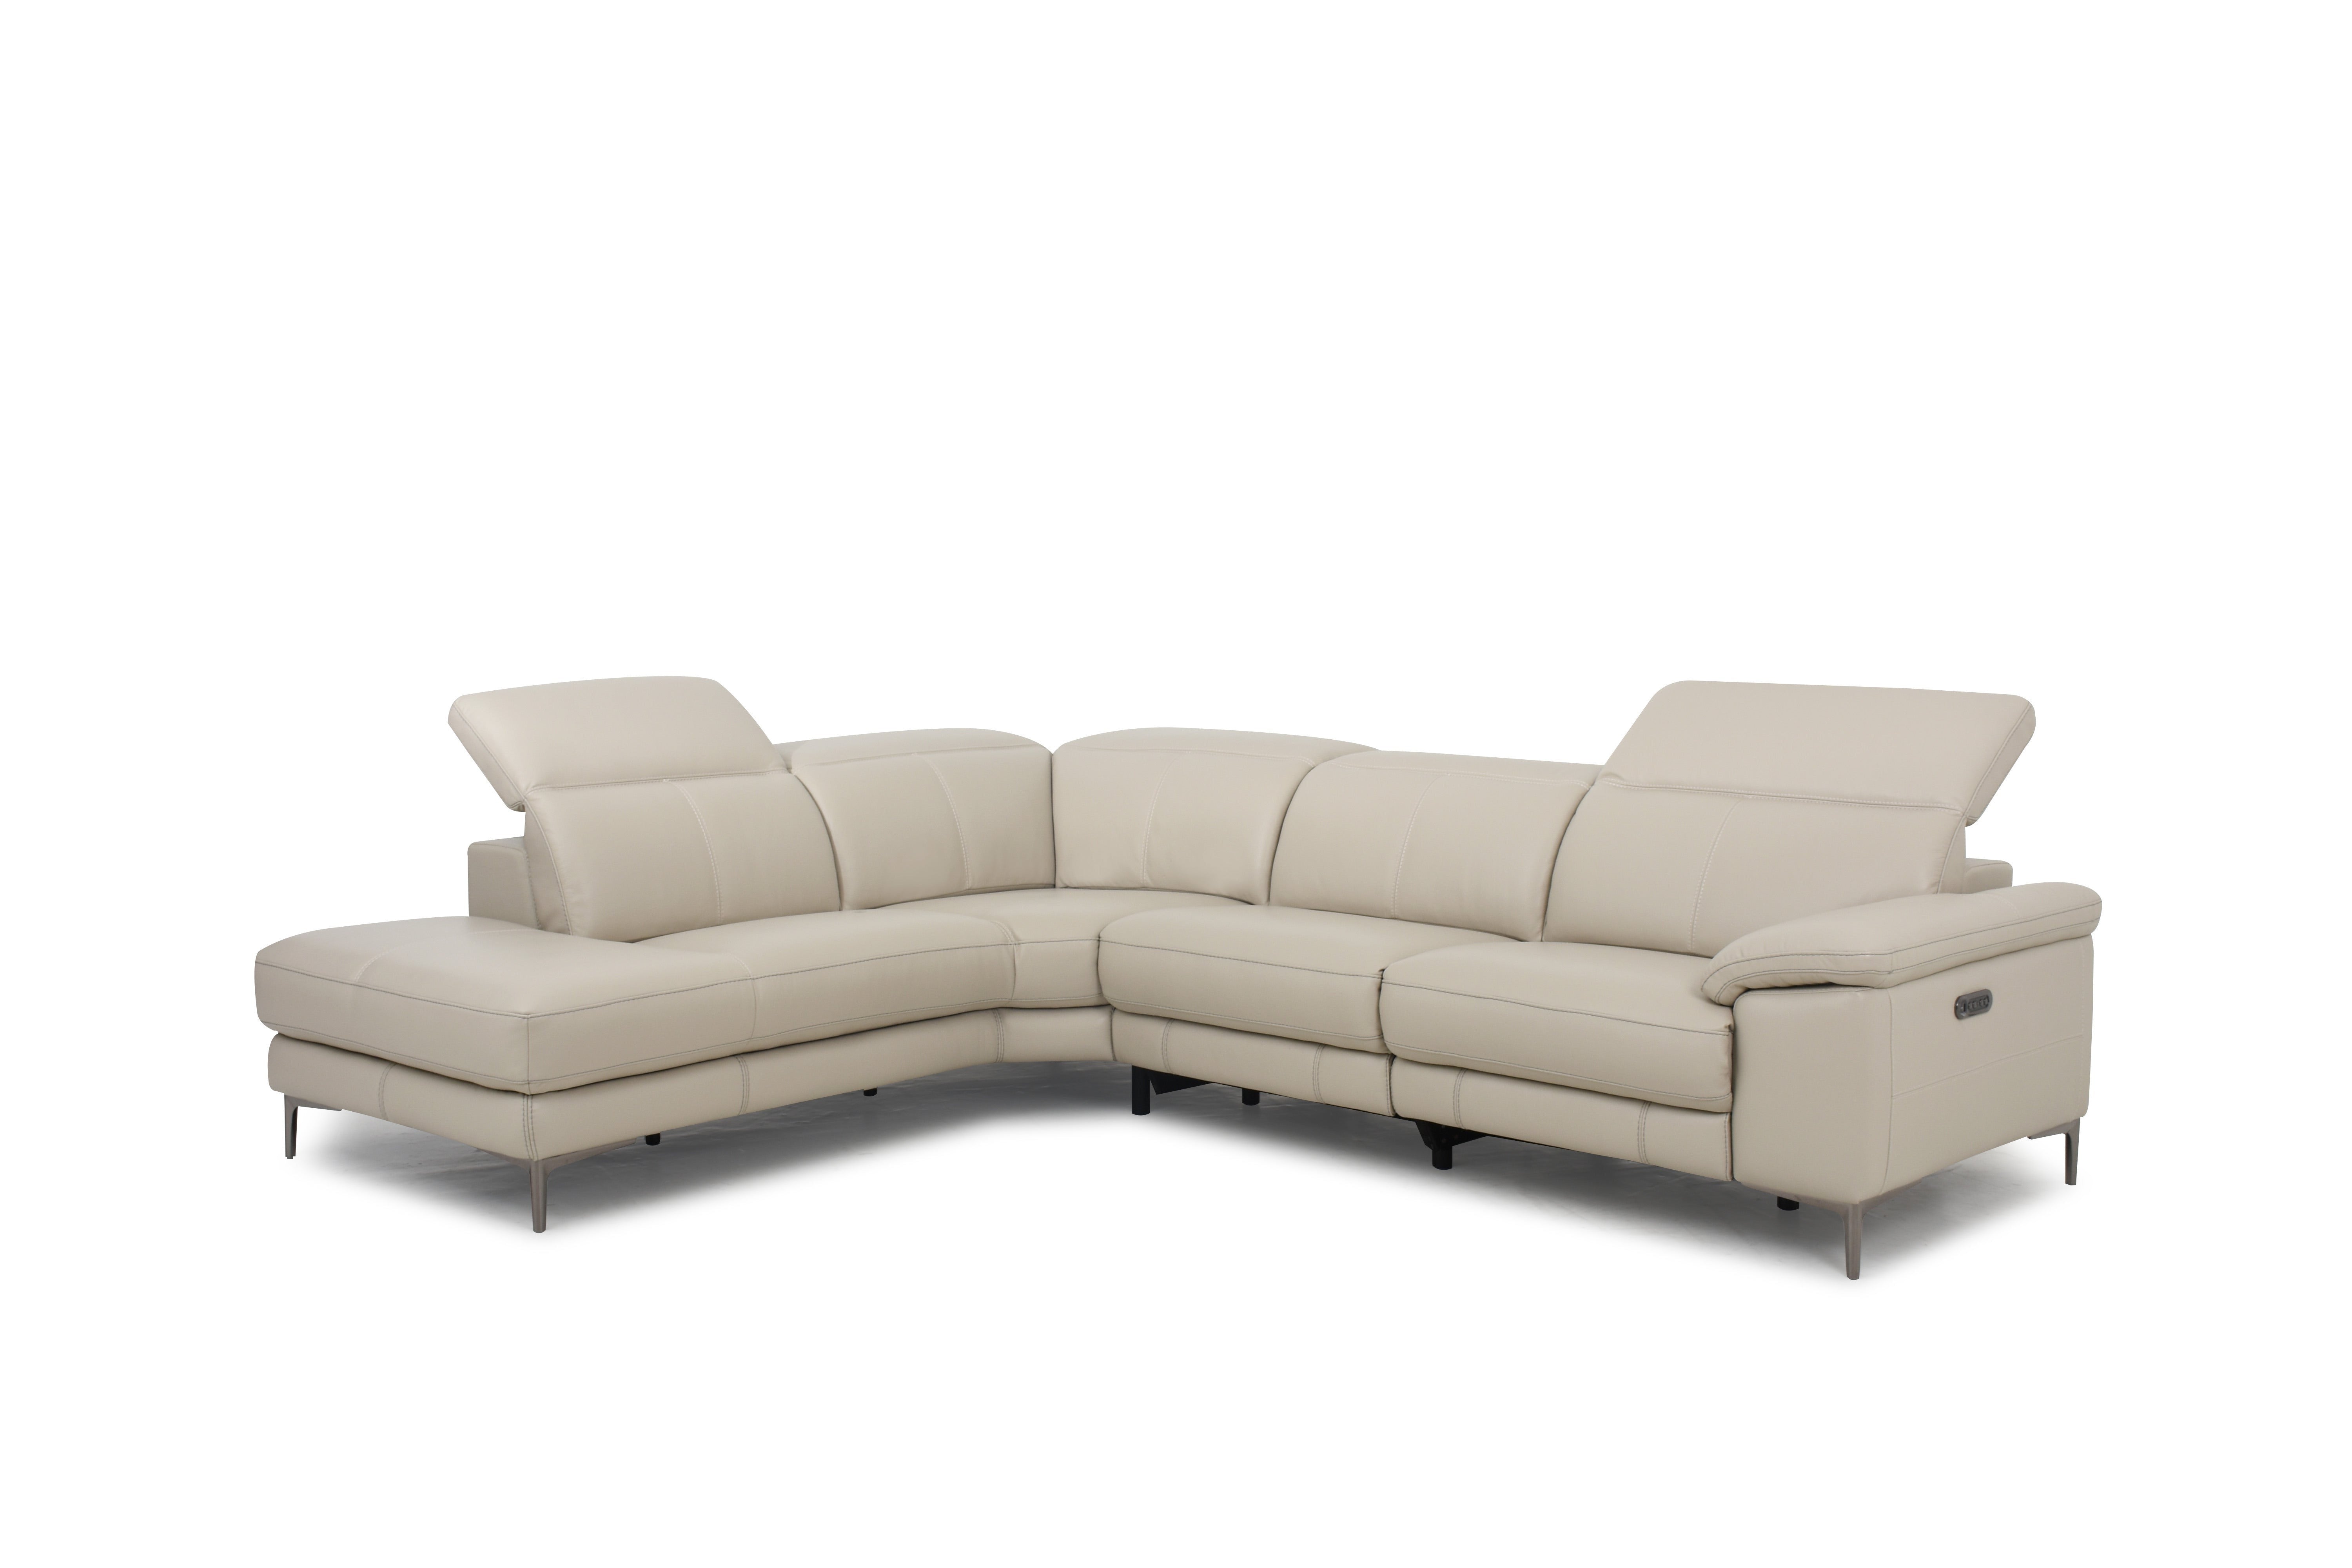 MU-11831 - Sectional Left Chaise w/ 2 Power Recliners-USB Port - 100% Leather Silver Grey